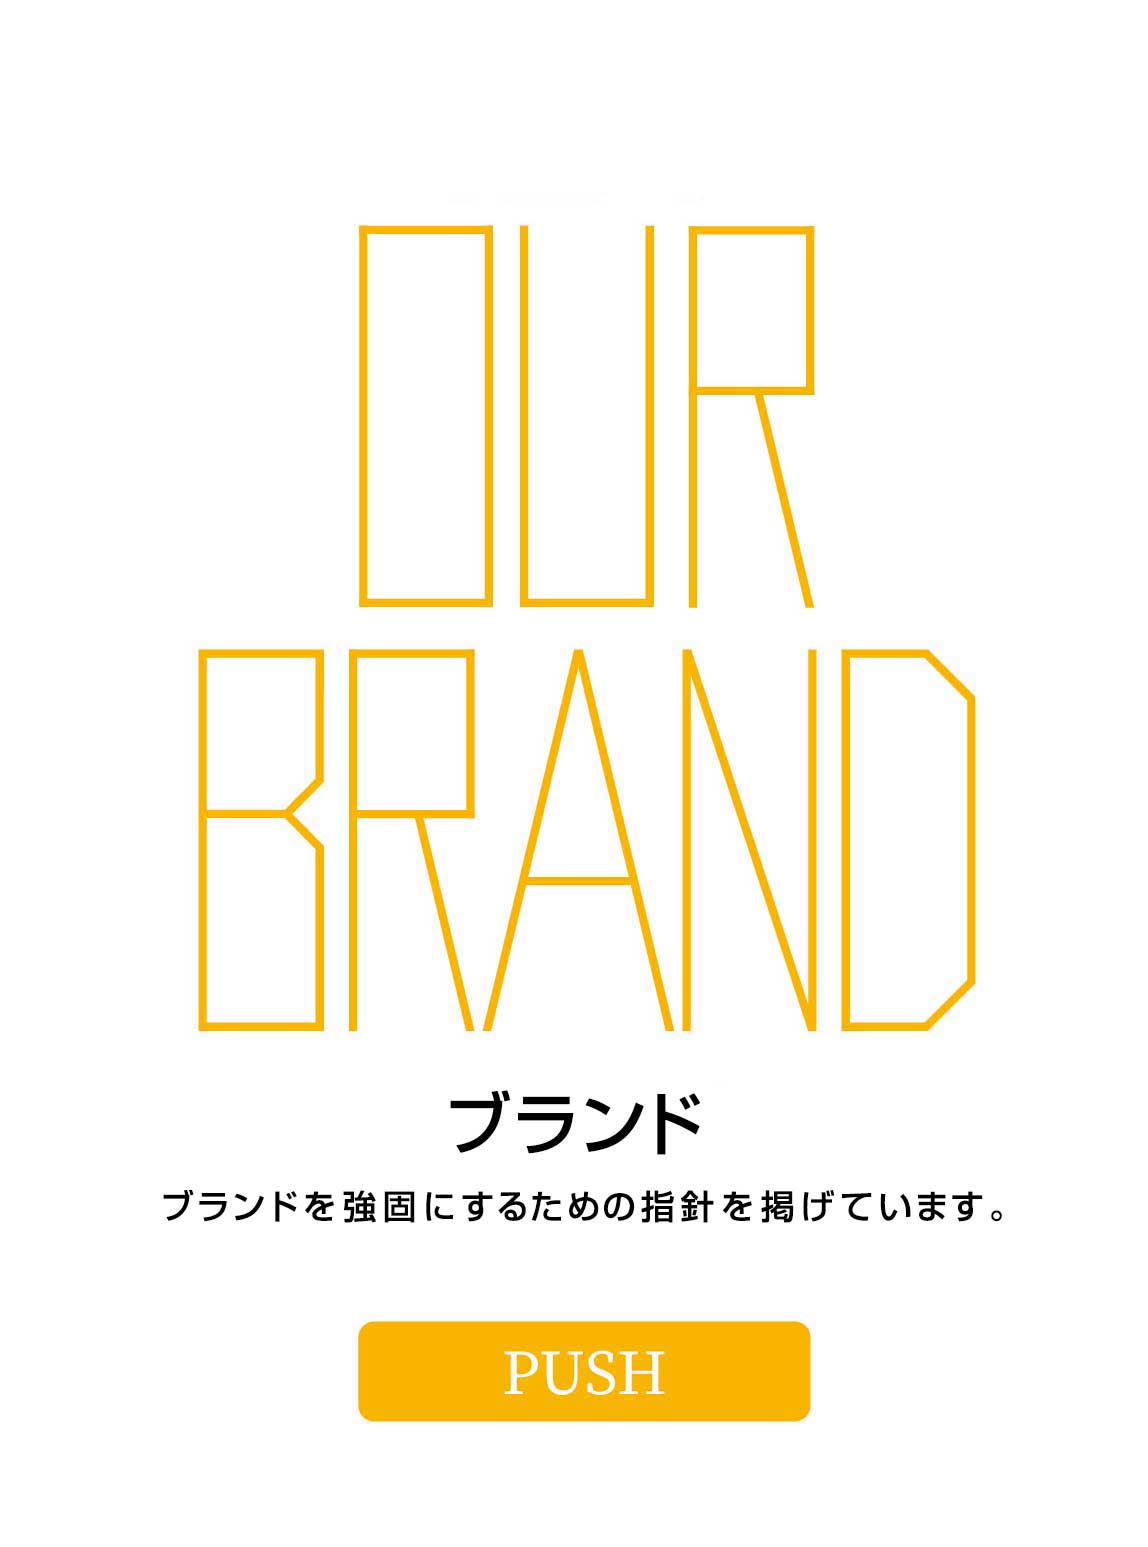 OUR BRAND